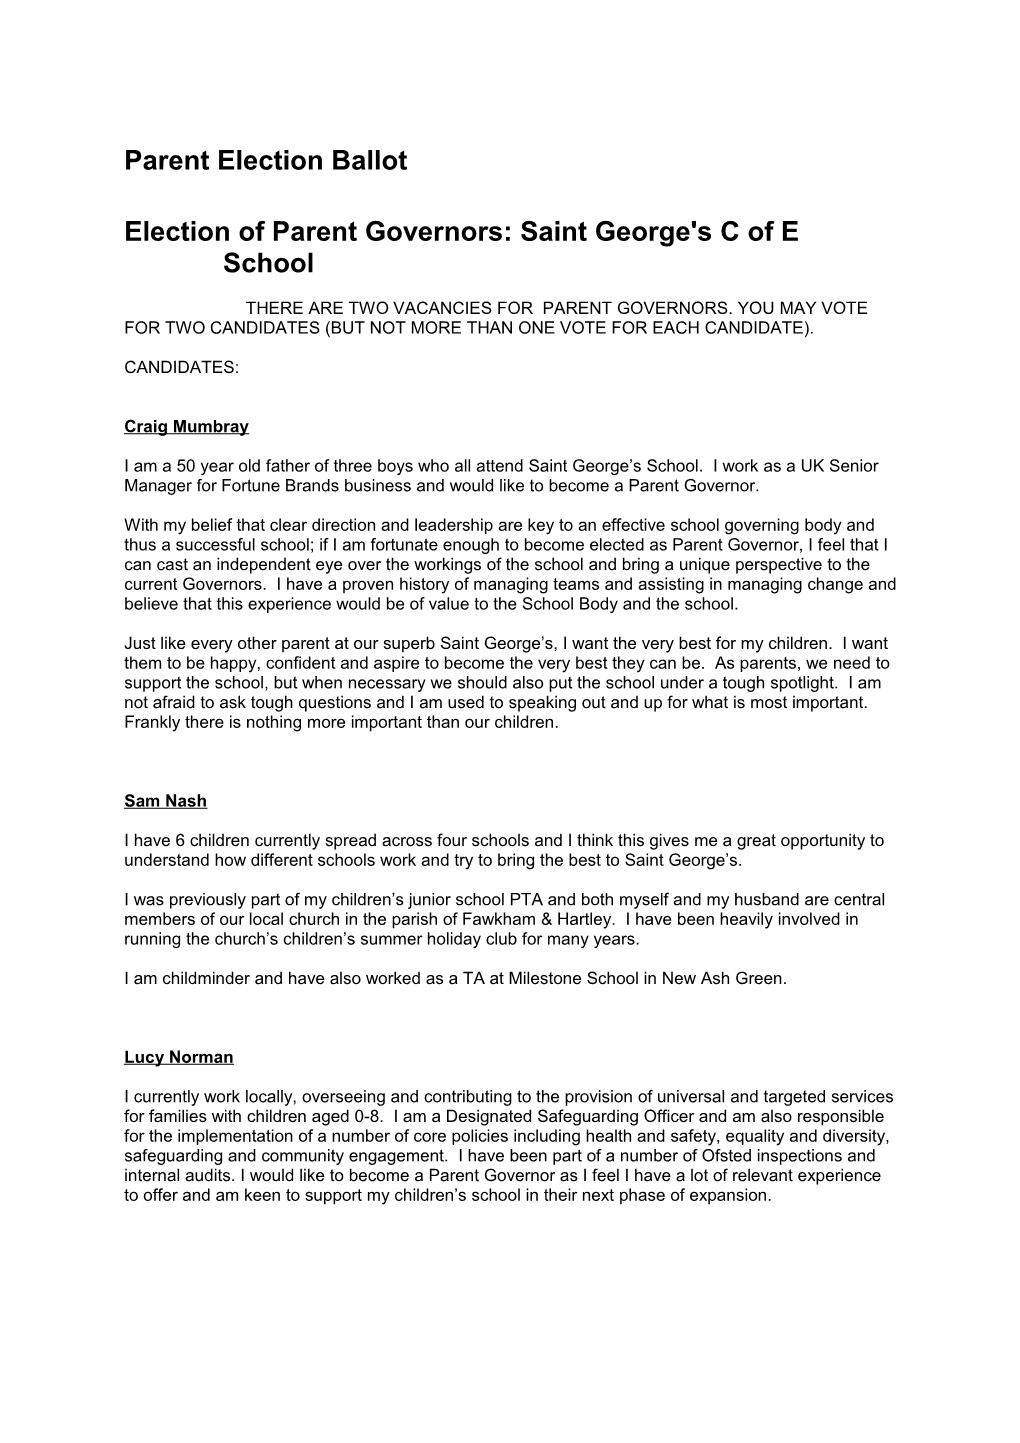 Election of Parent Governors: Saint George's C of E School